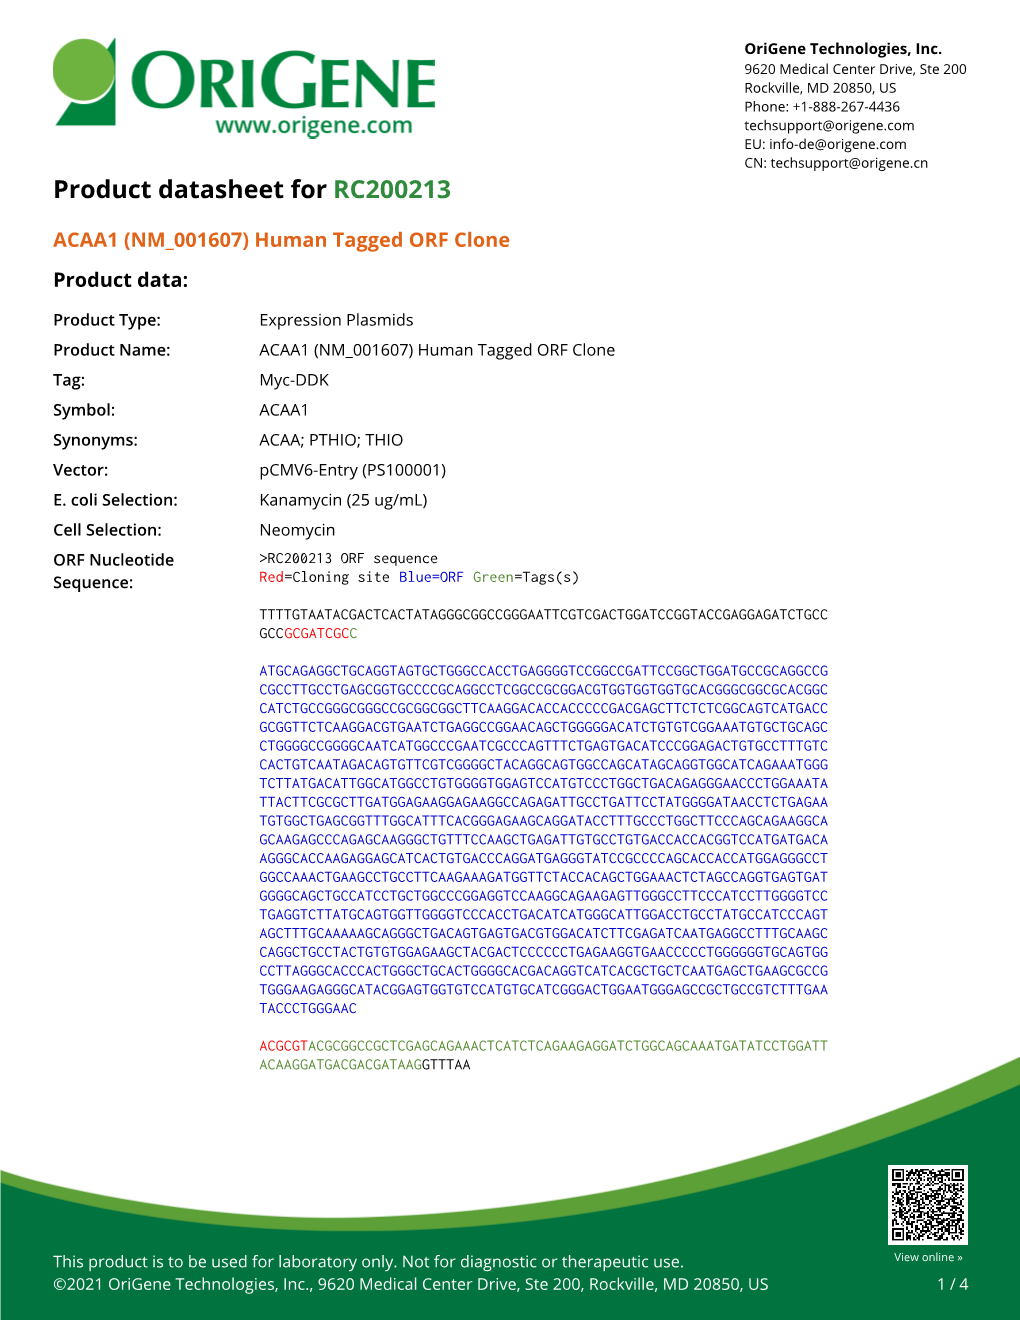 ACAA1 (NM 001607) Human Tagged ORF Clone Product Data